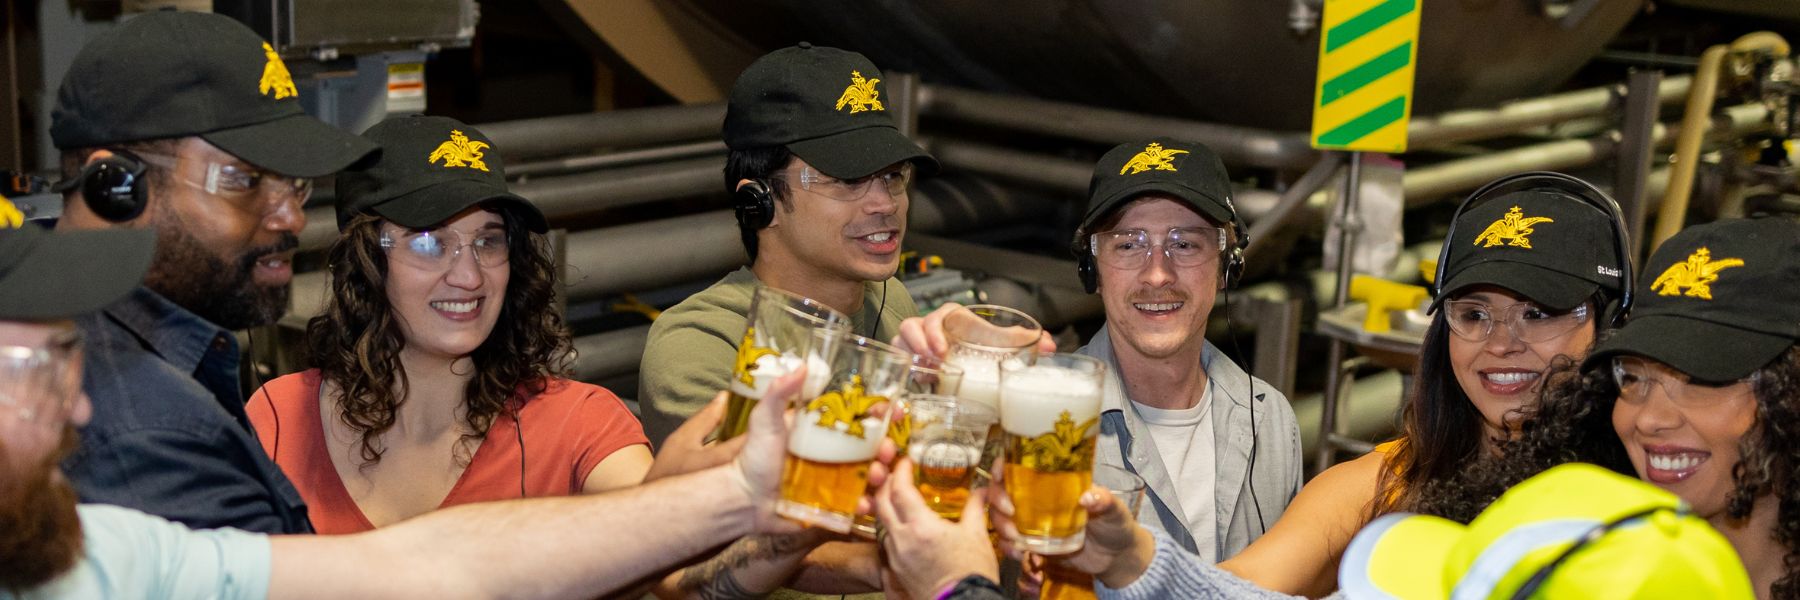 A group enjoys free beer on a tour of the Anheuser-Busch Brewery in St. Louis.